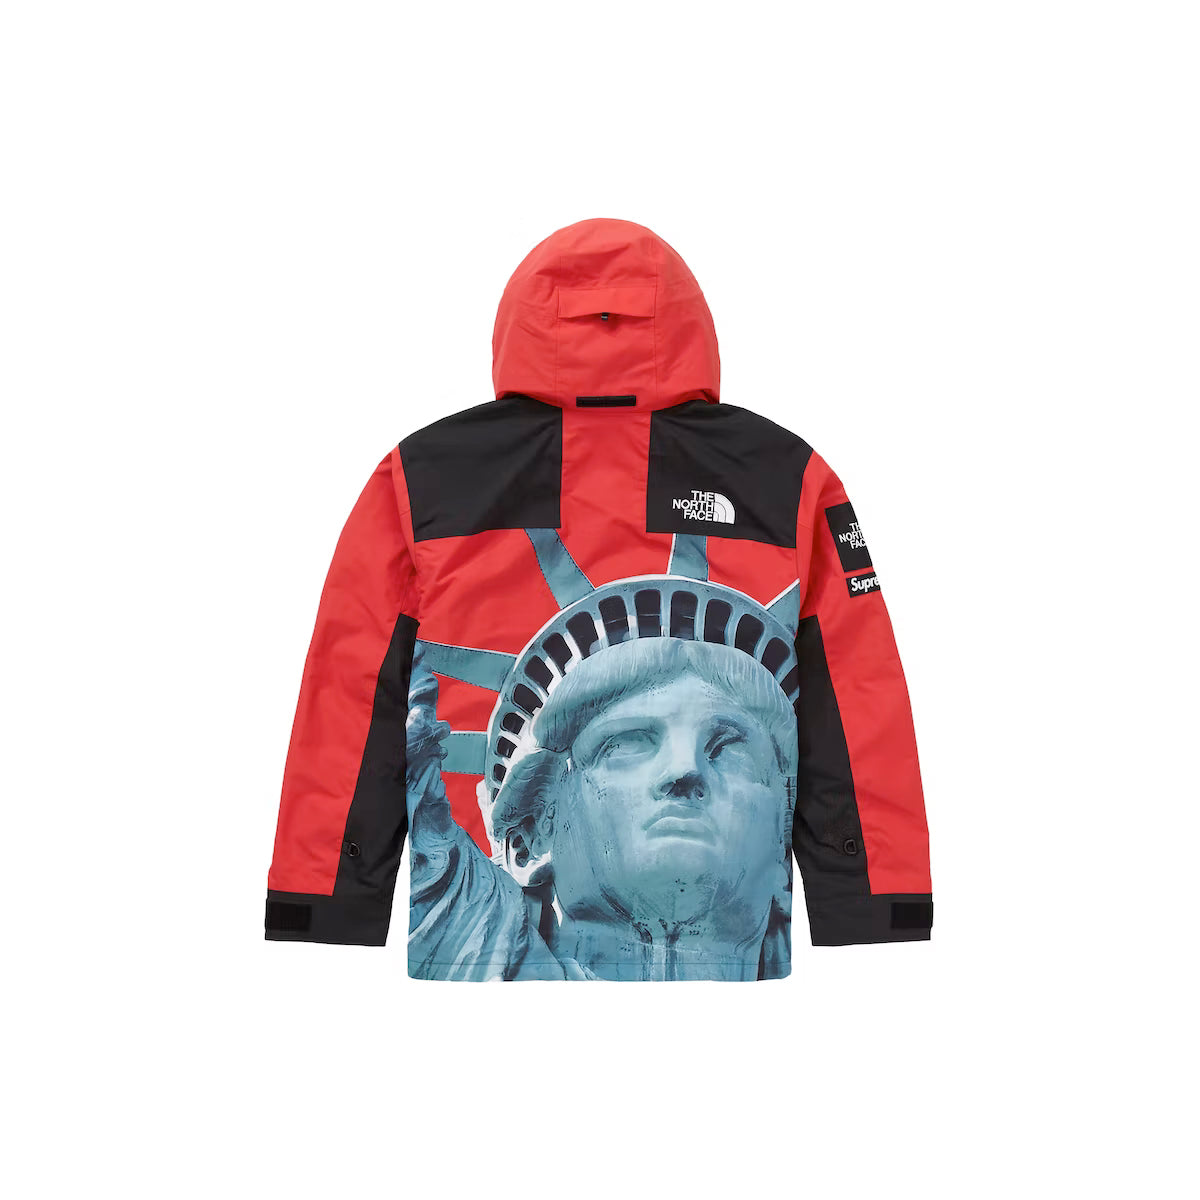 Supreme The North Face of Statue of Liberty Mountain Jacket Black on the  account Instagram of @redwood_sf